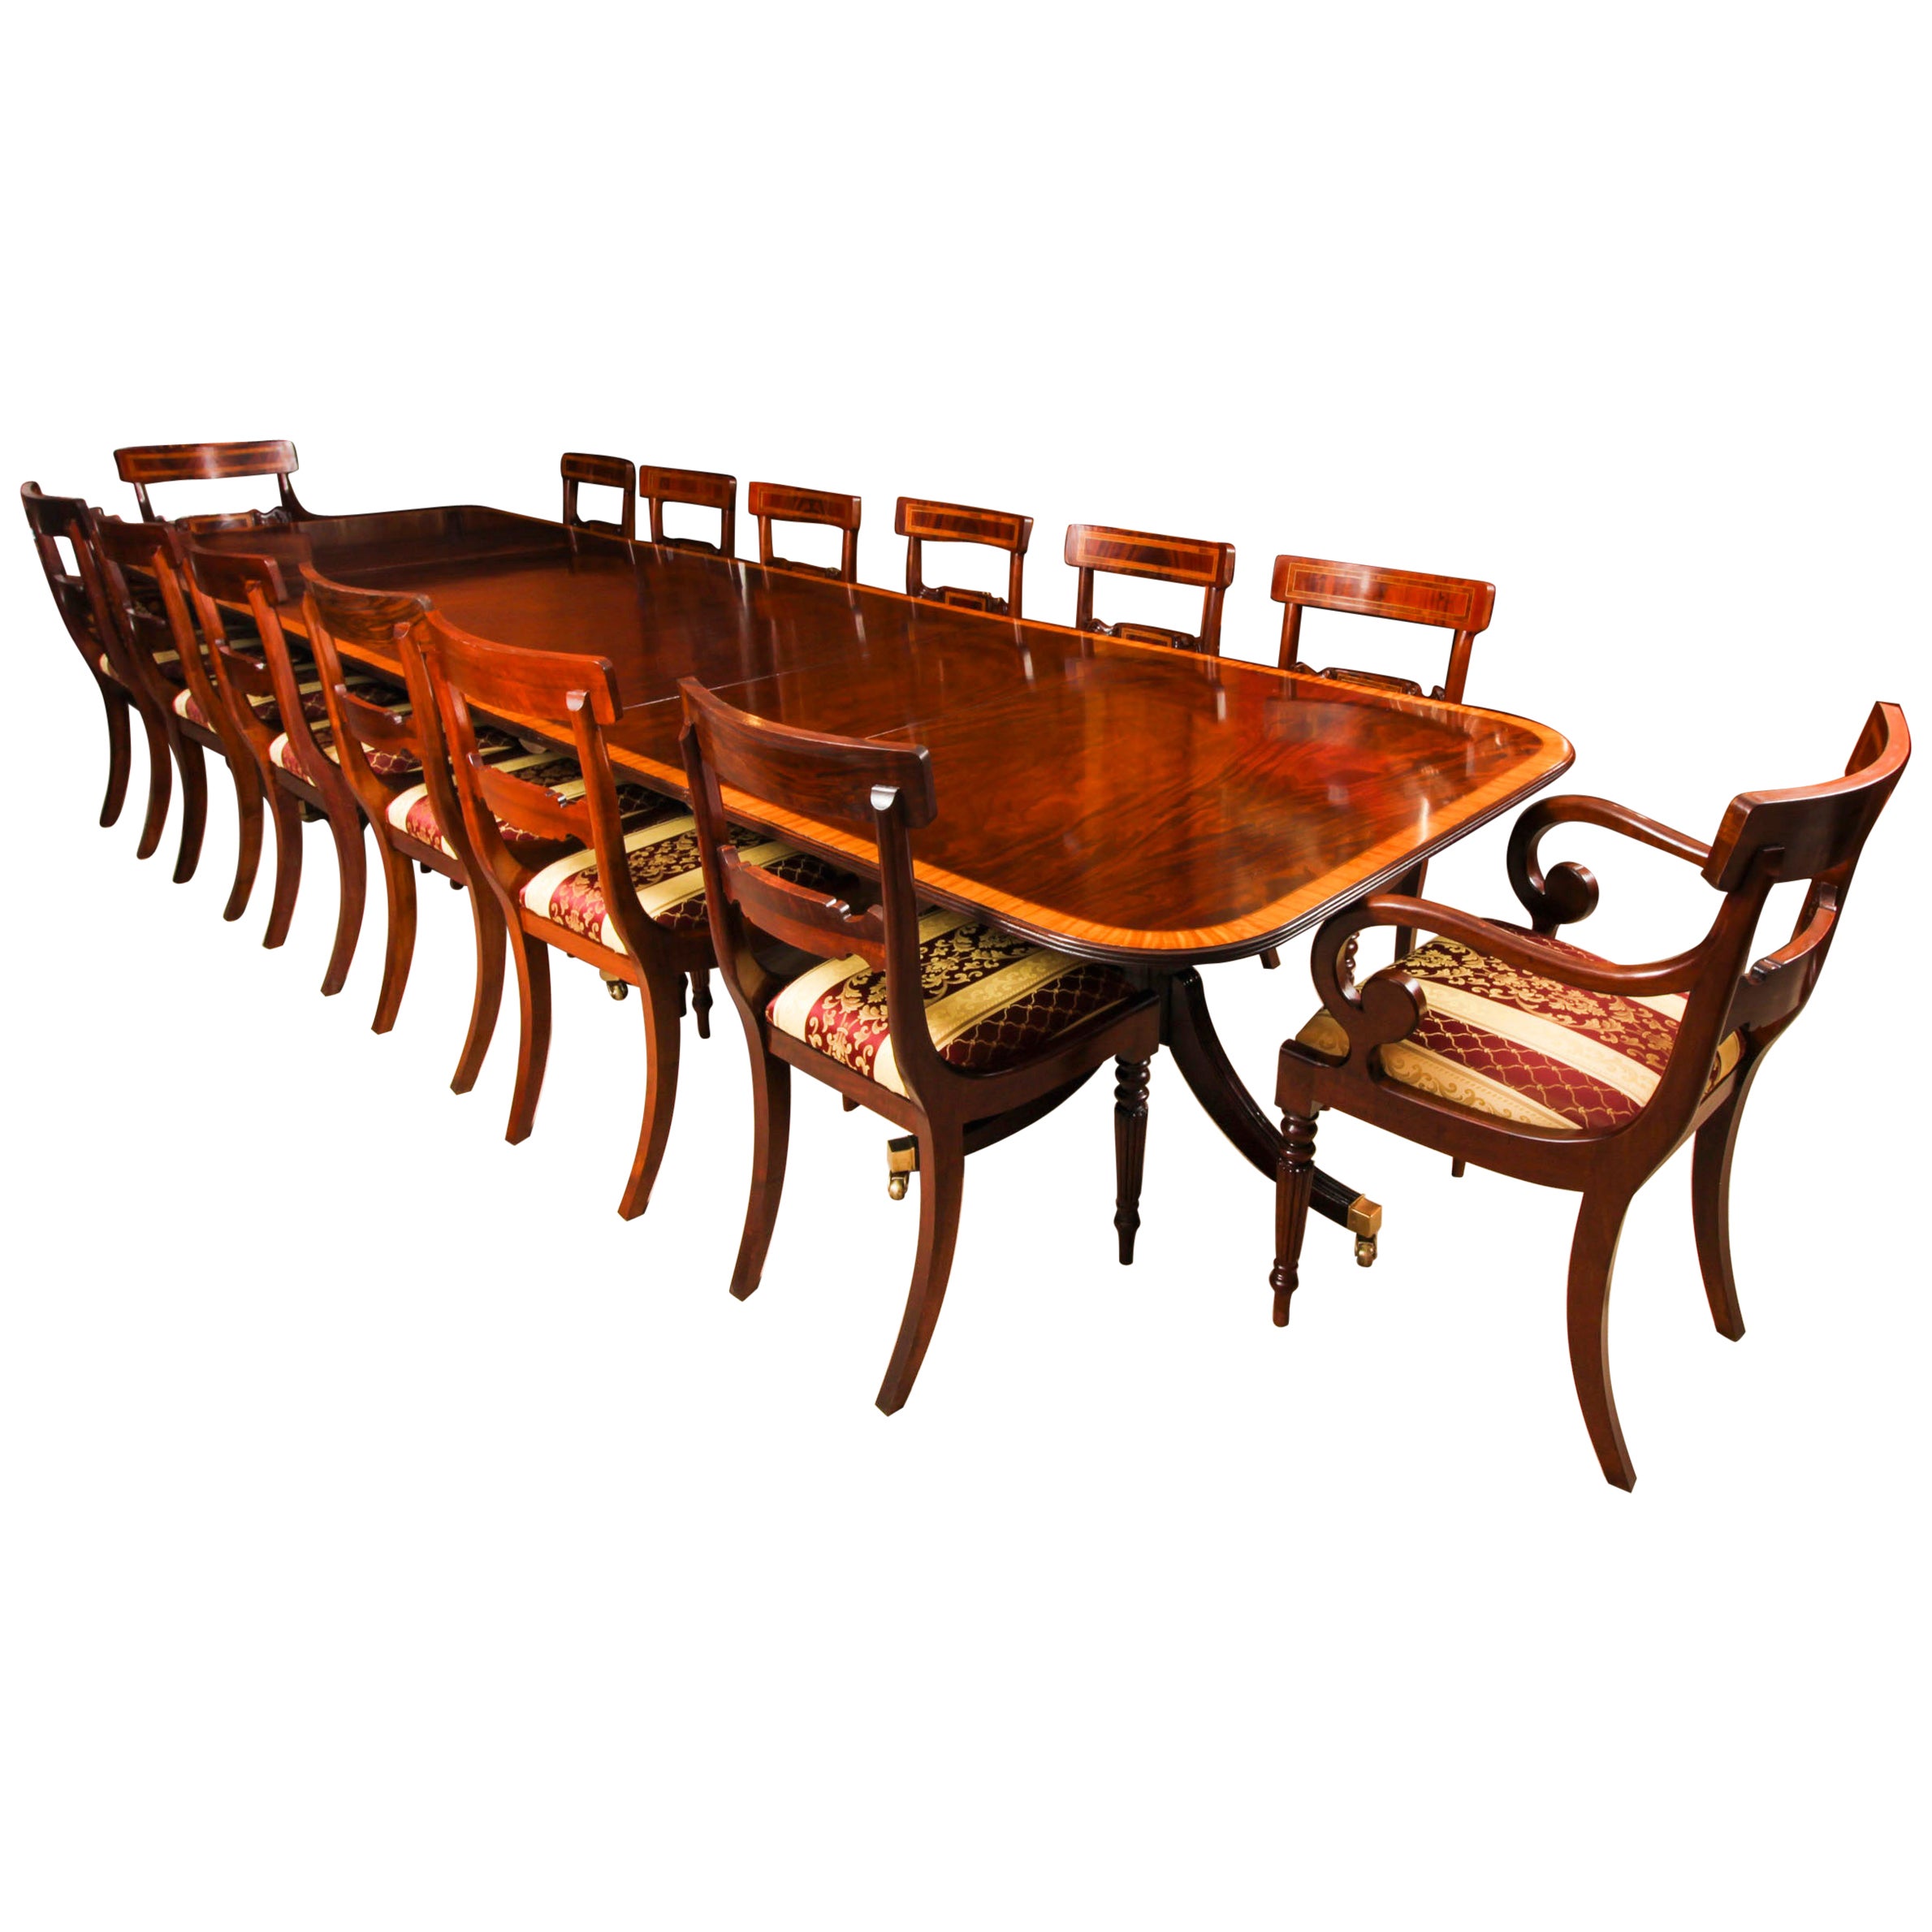 Vintage 13ft Three Pillar Mahogany Dining Table with 14 Chairs 20th C For Sale